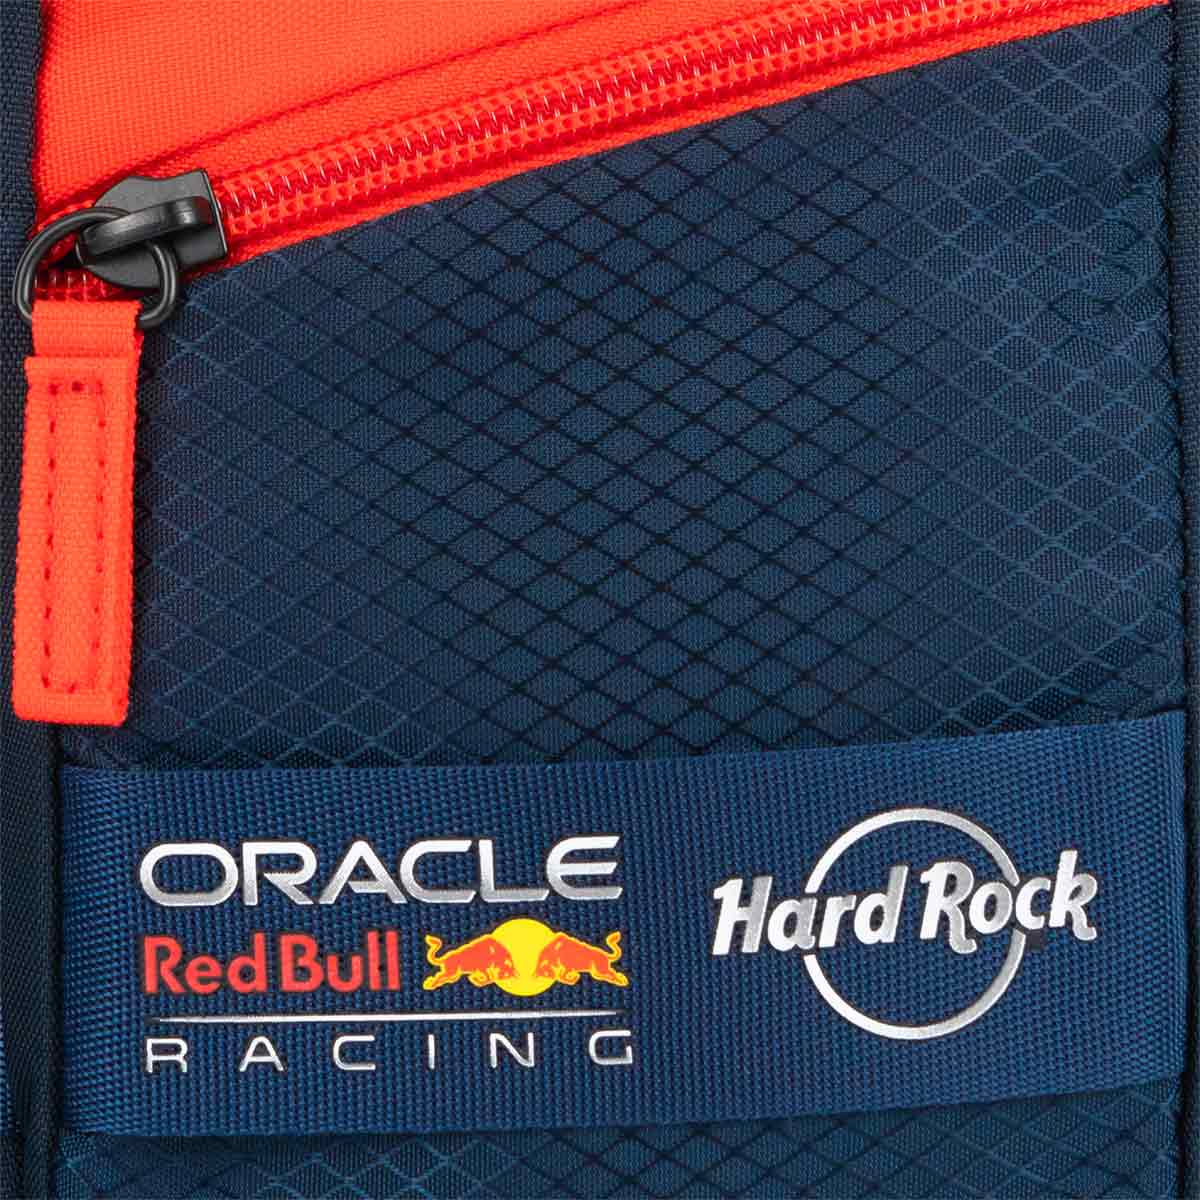 Oracle Red Bull Jetset Crossbody Bag in Navy Blue image number 2